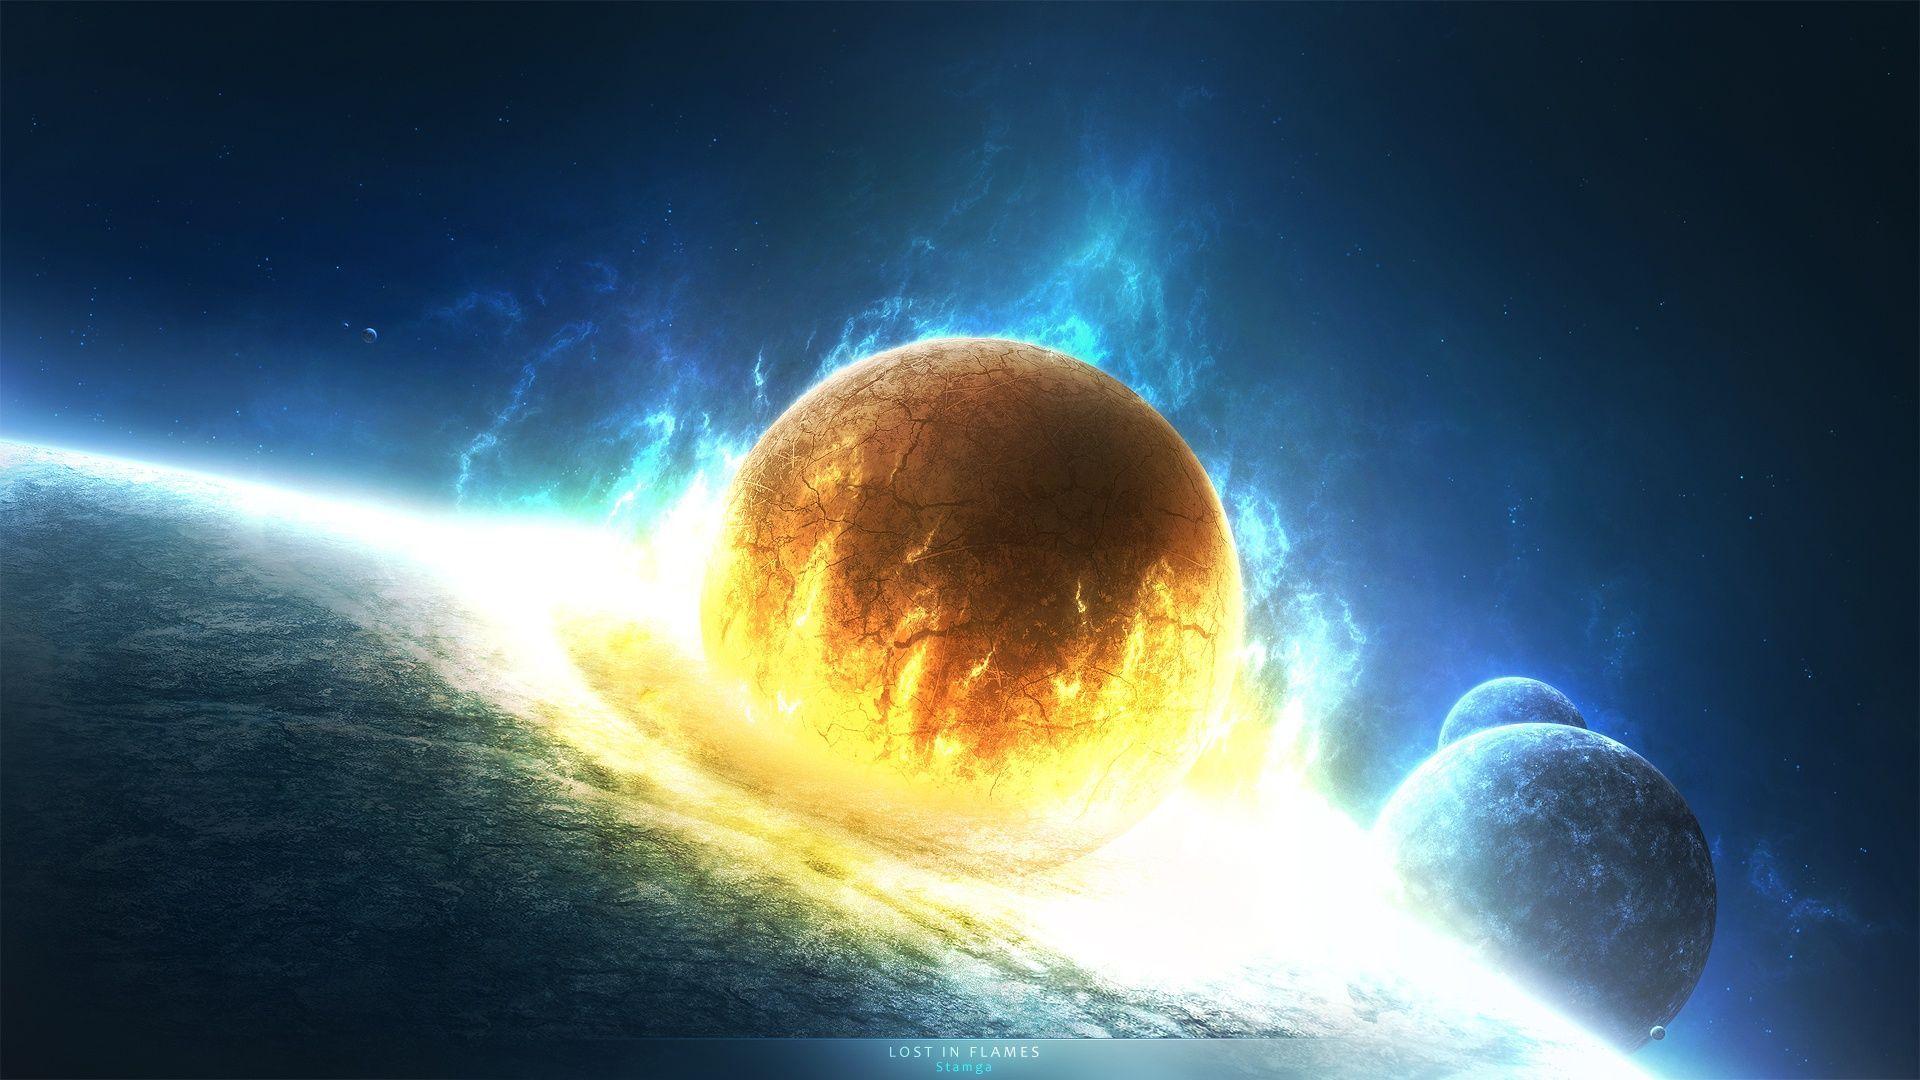 Disaster doomsday planet collision wallpaper 1920x1080. Space